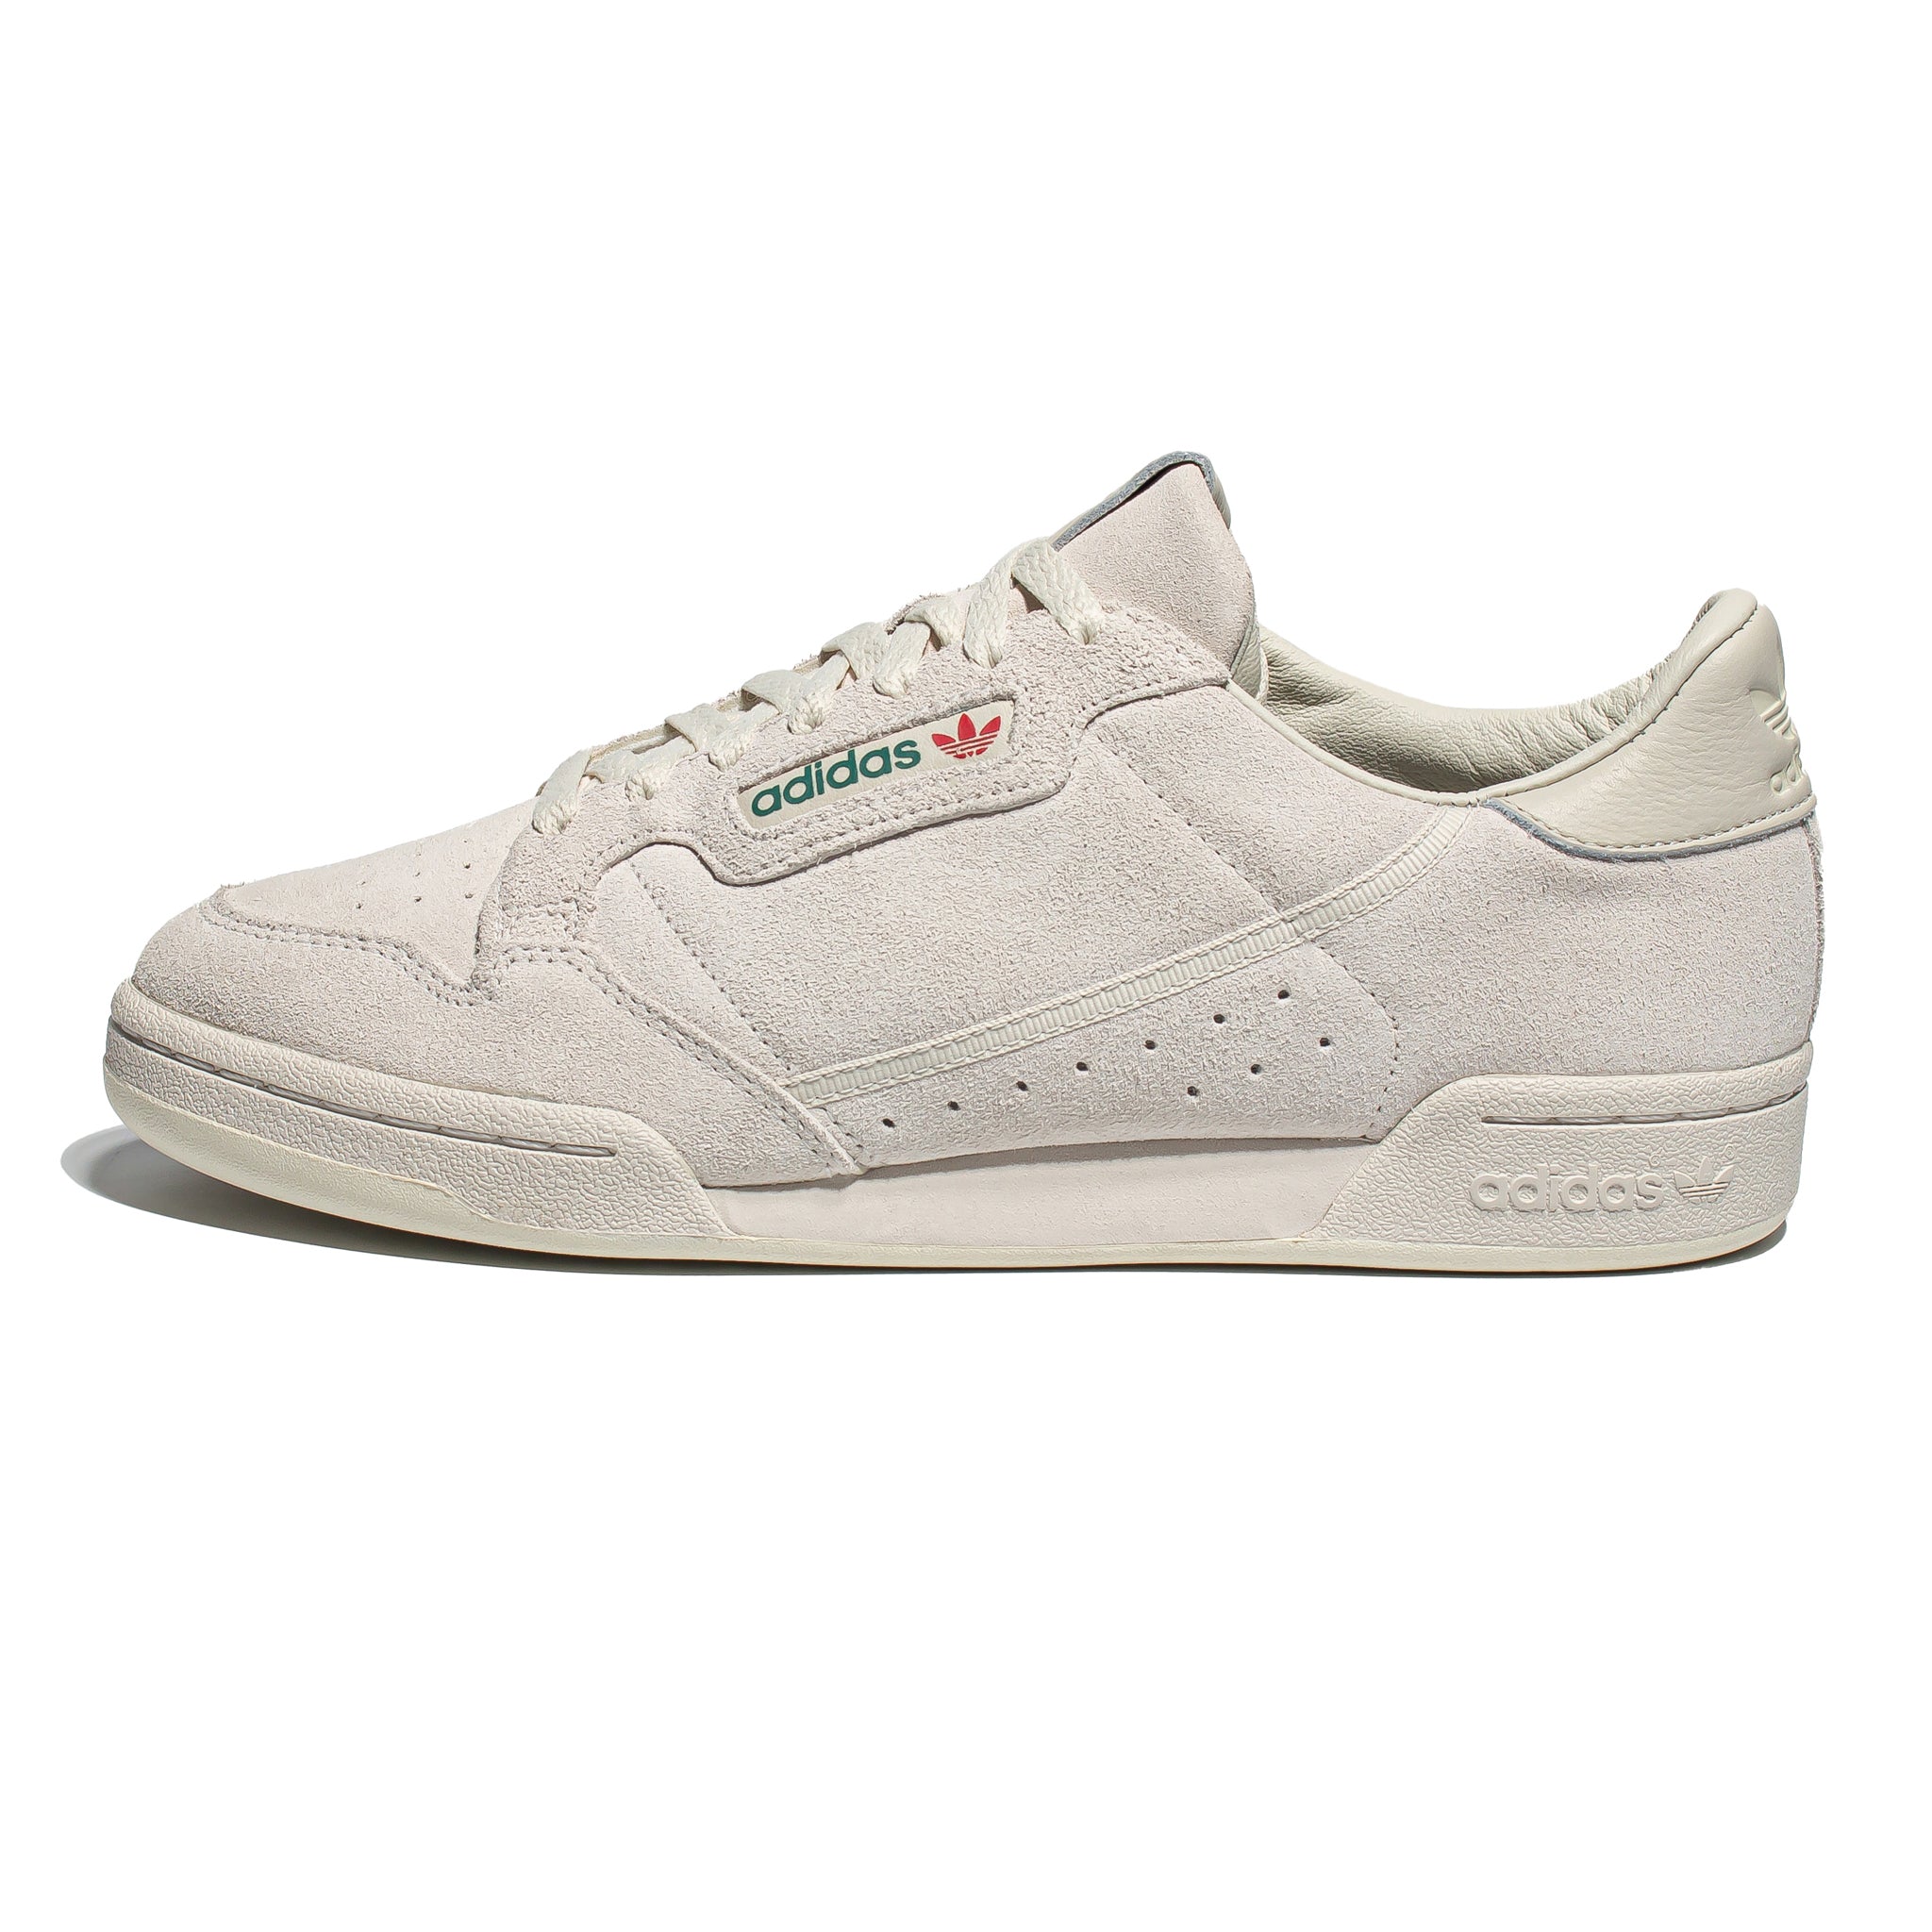 ADIDAS Continental 80 Suede Raw White